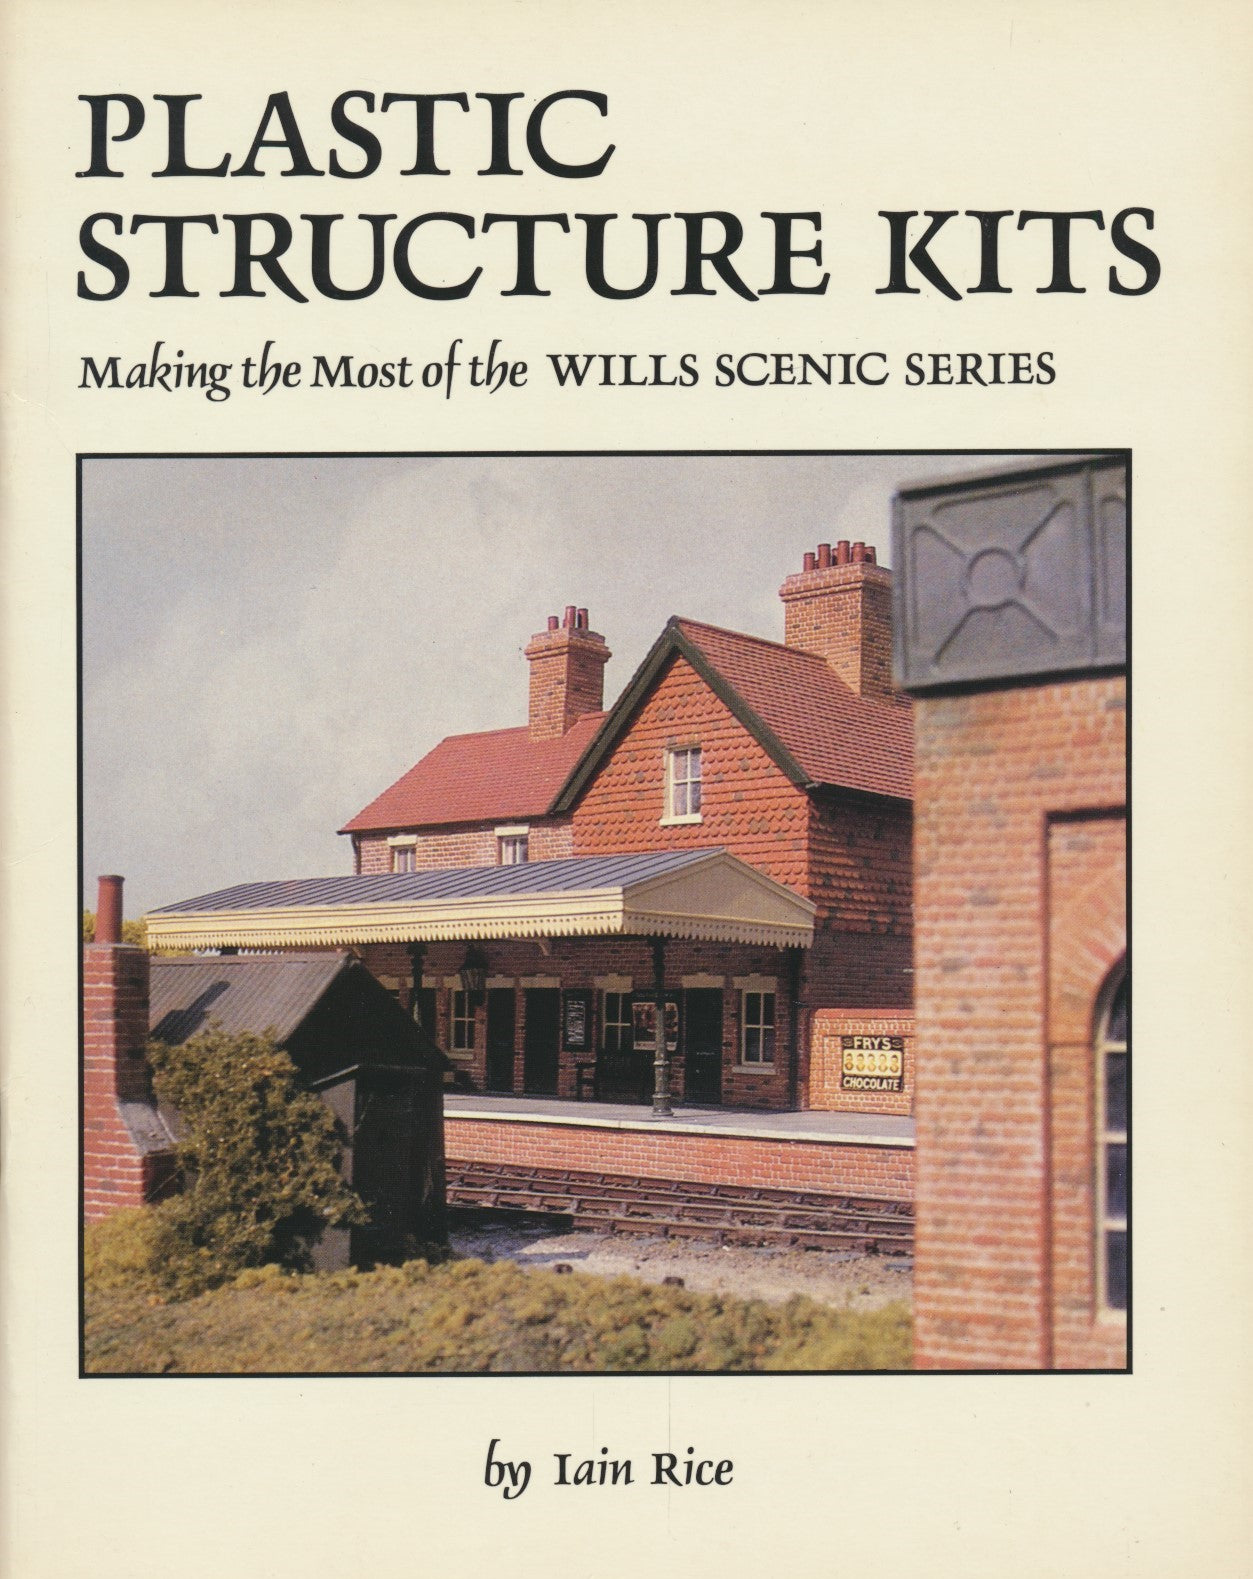 Plastic Structure Kits - Making the Most of the Wills Scenic Series